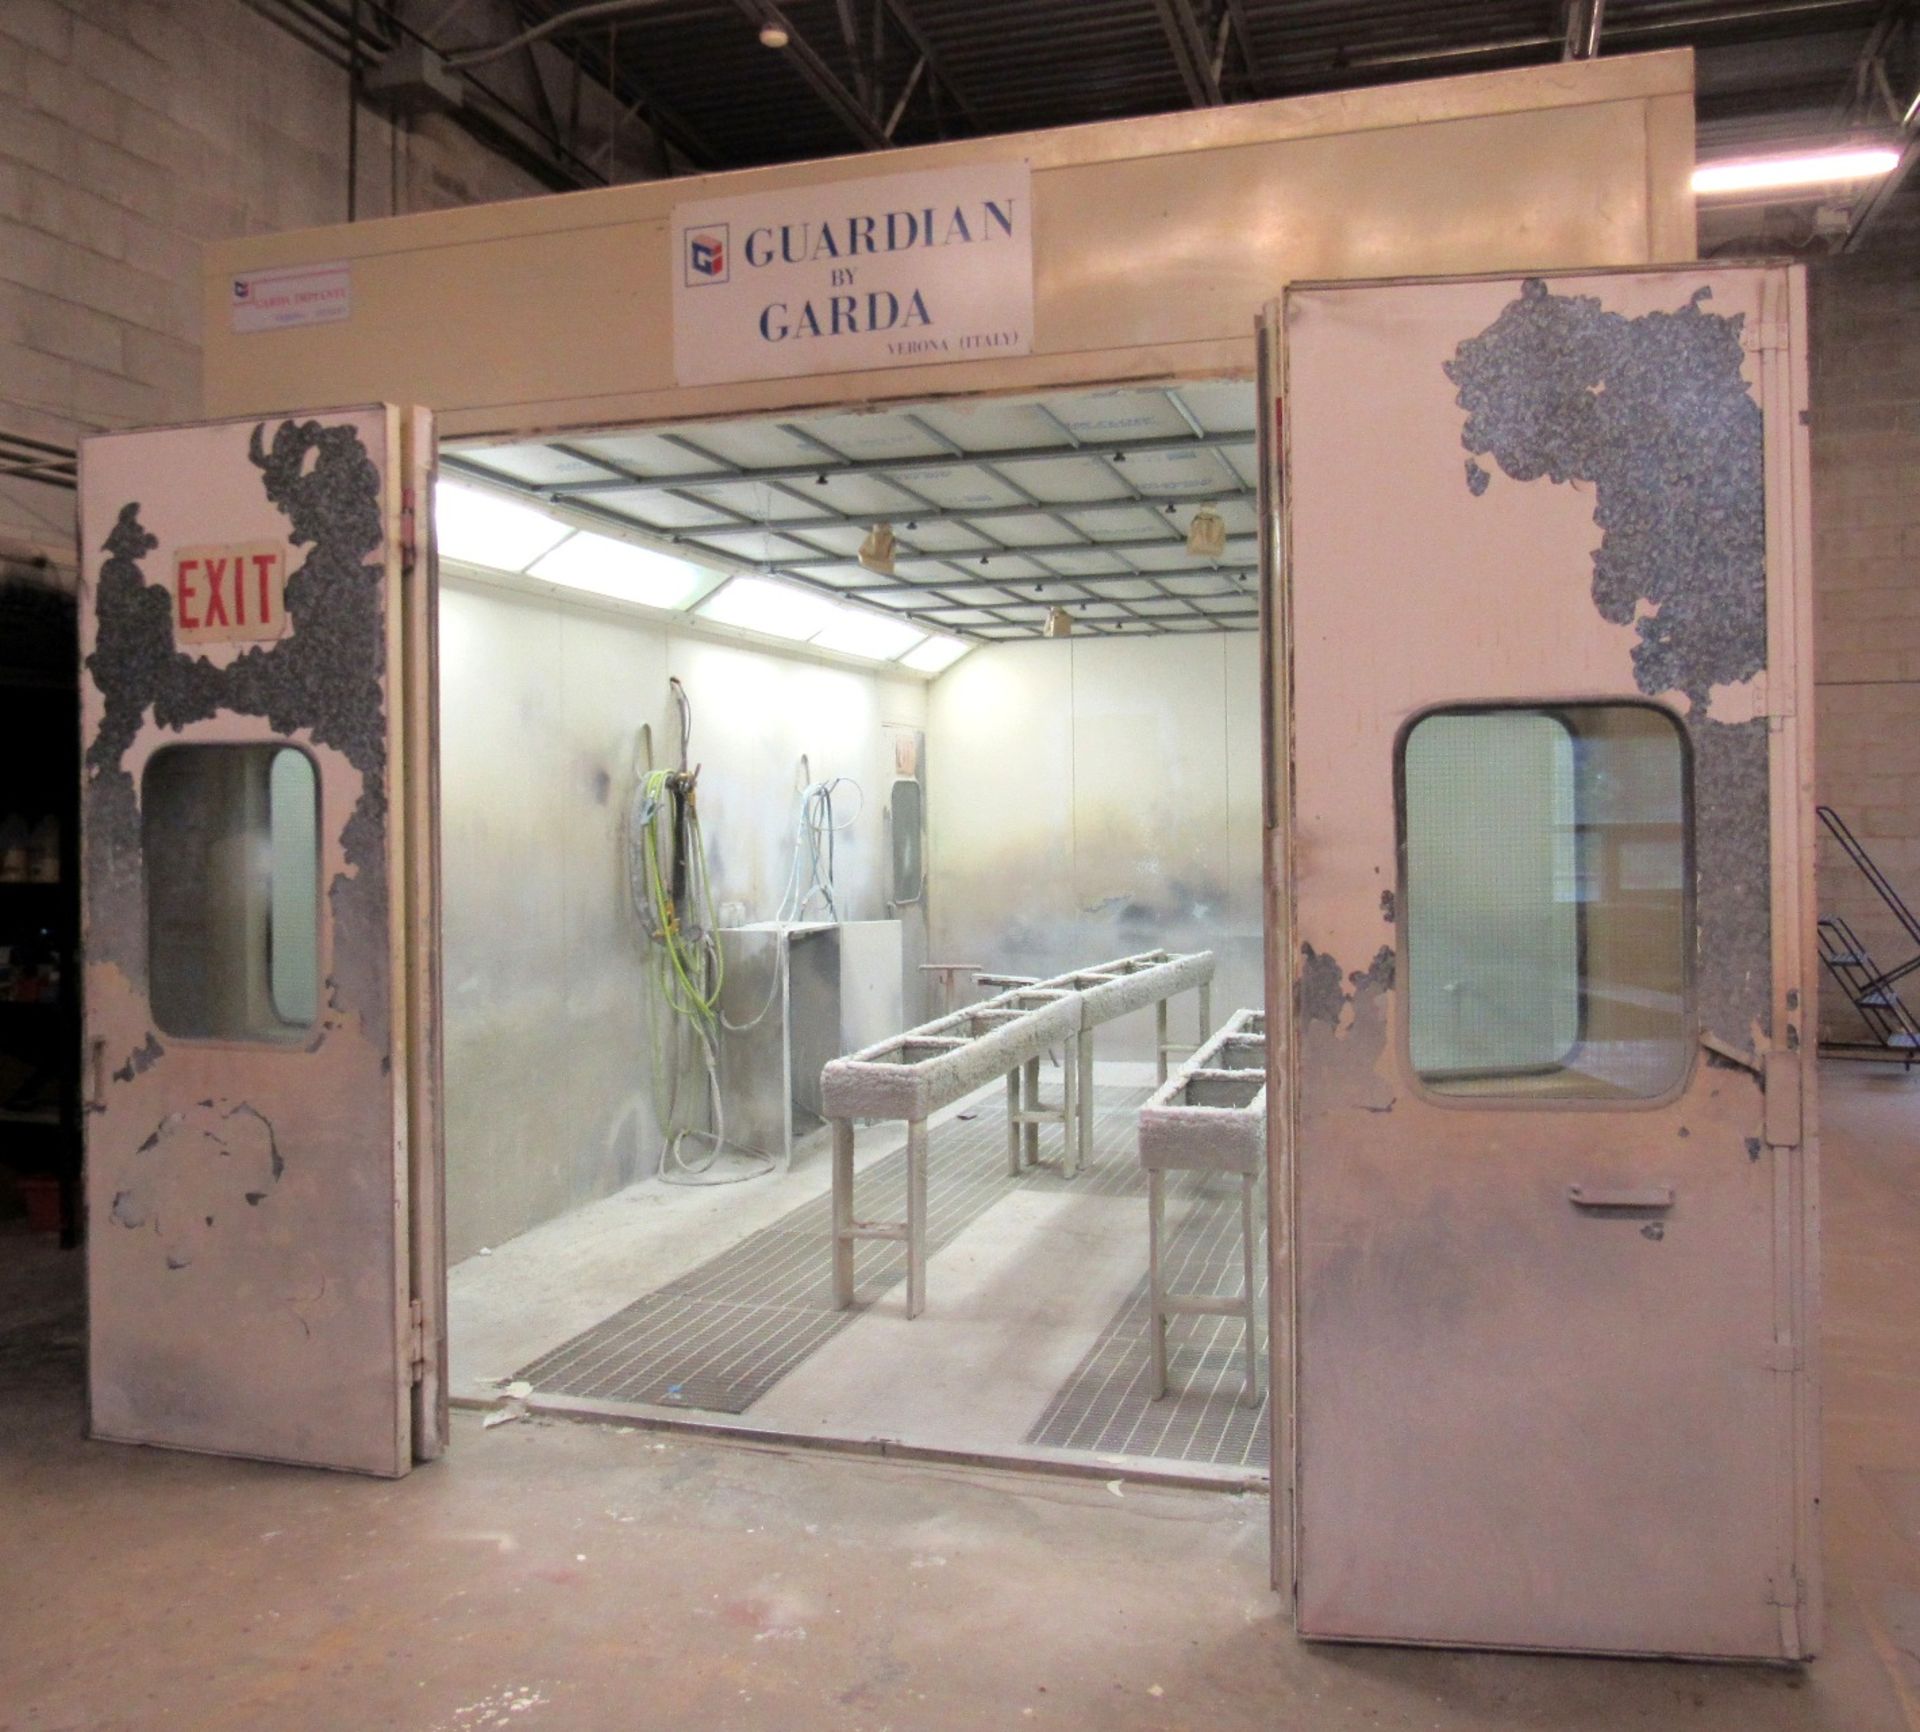 Guardian Garda 13'W x 23'L x 9'H Totally Enclosed Paint Booth - Image 3 of 10